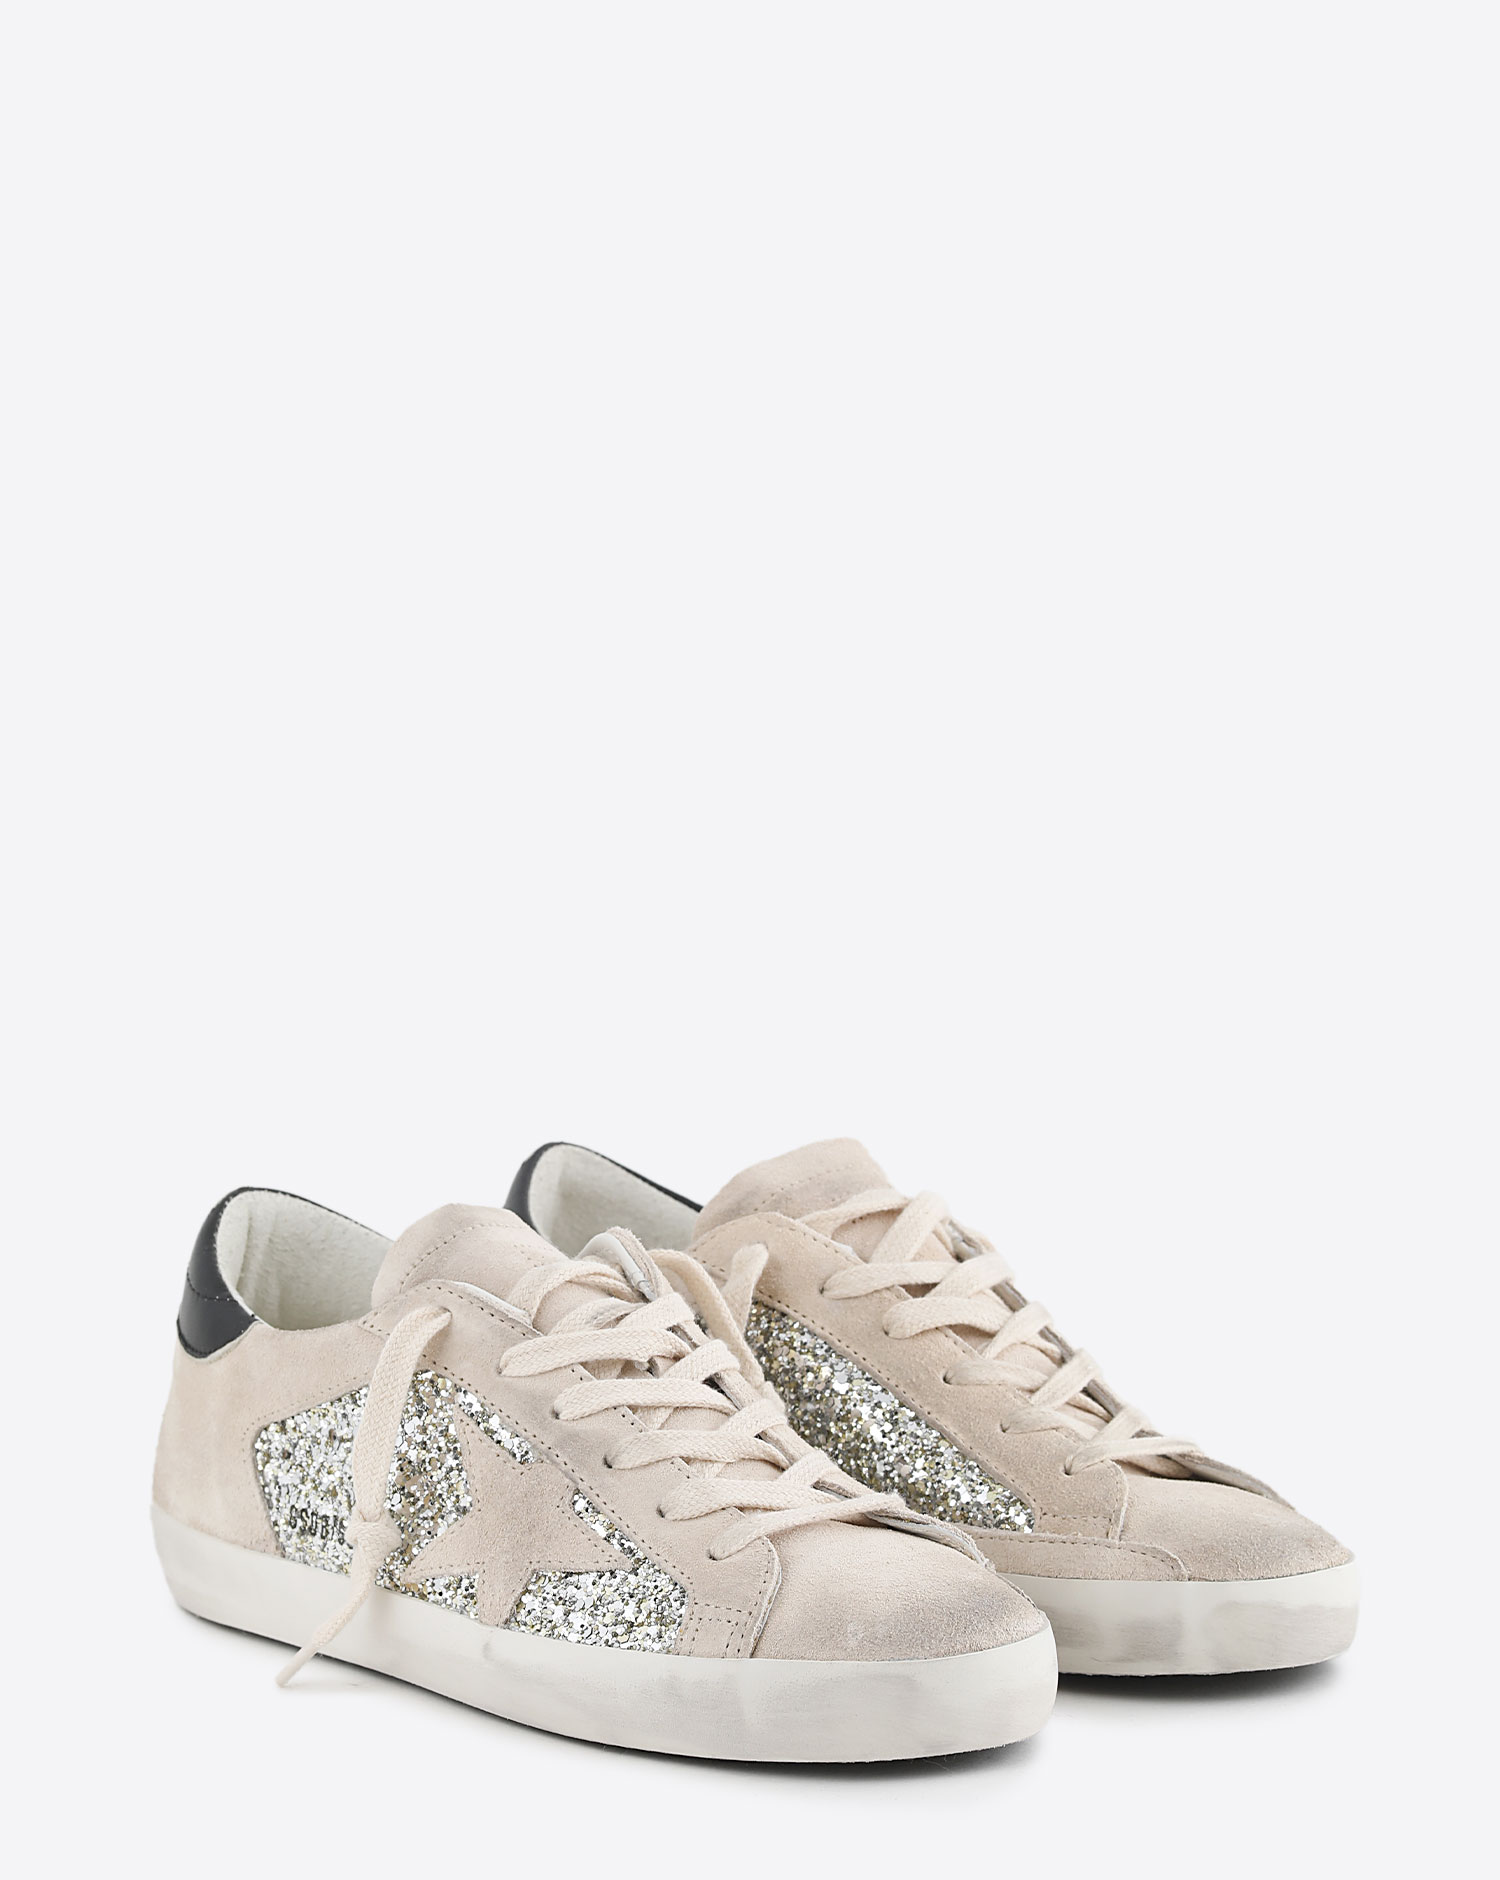 Golden Goose Sneakers Are on Sale at Rue La La for 30% Off